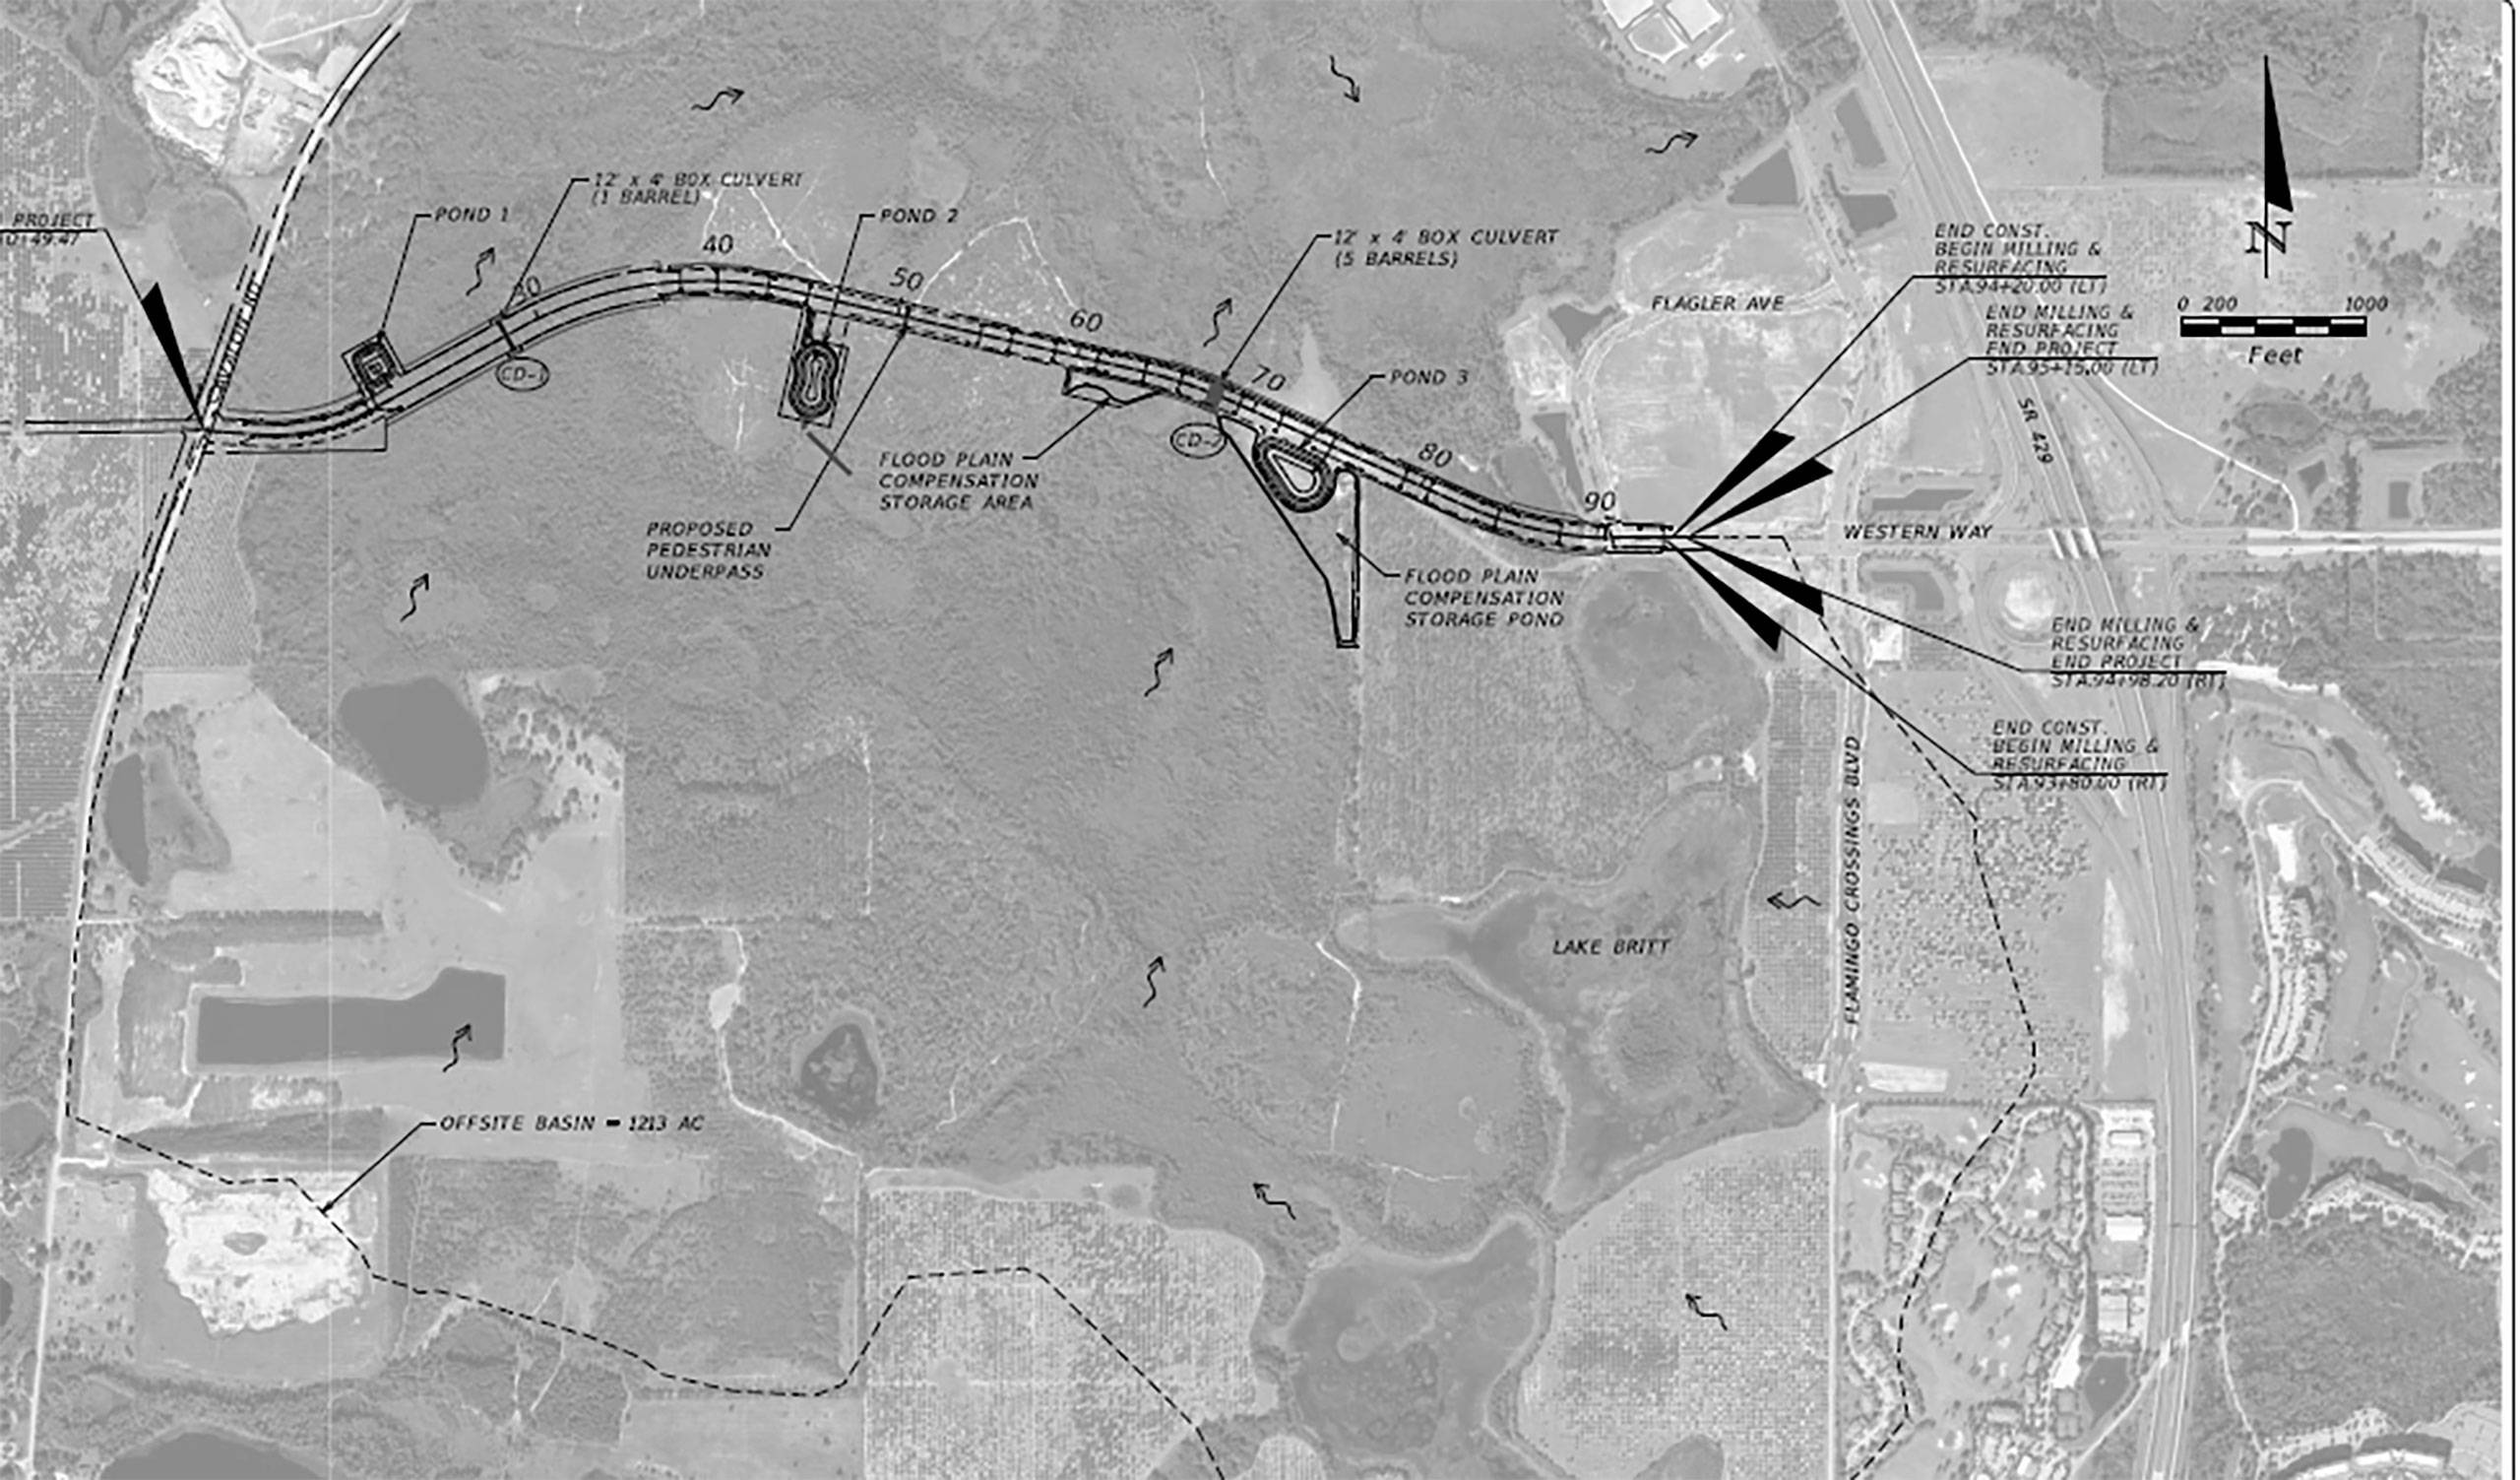 Western Way to be extended through Flamingo Crossings to Route 545